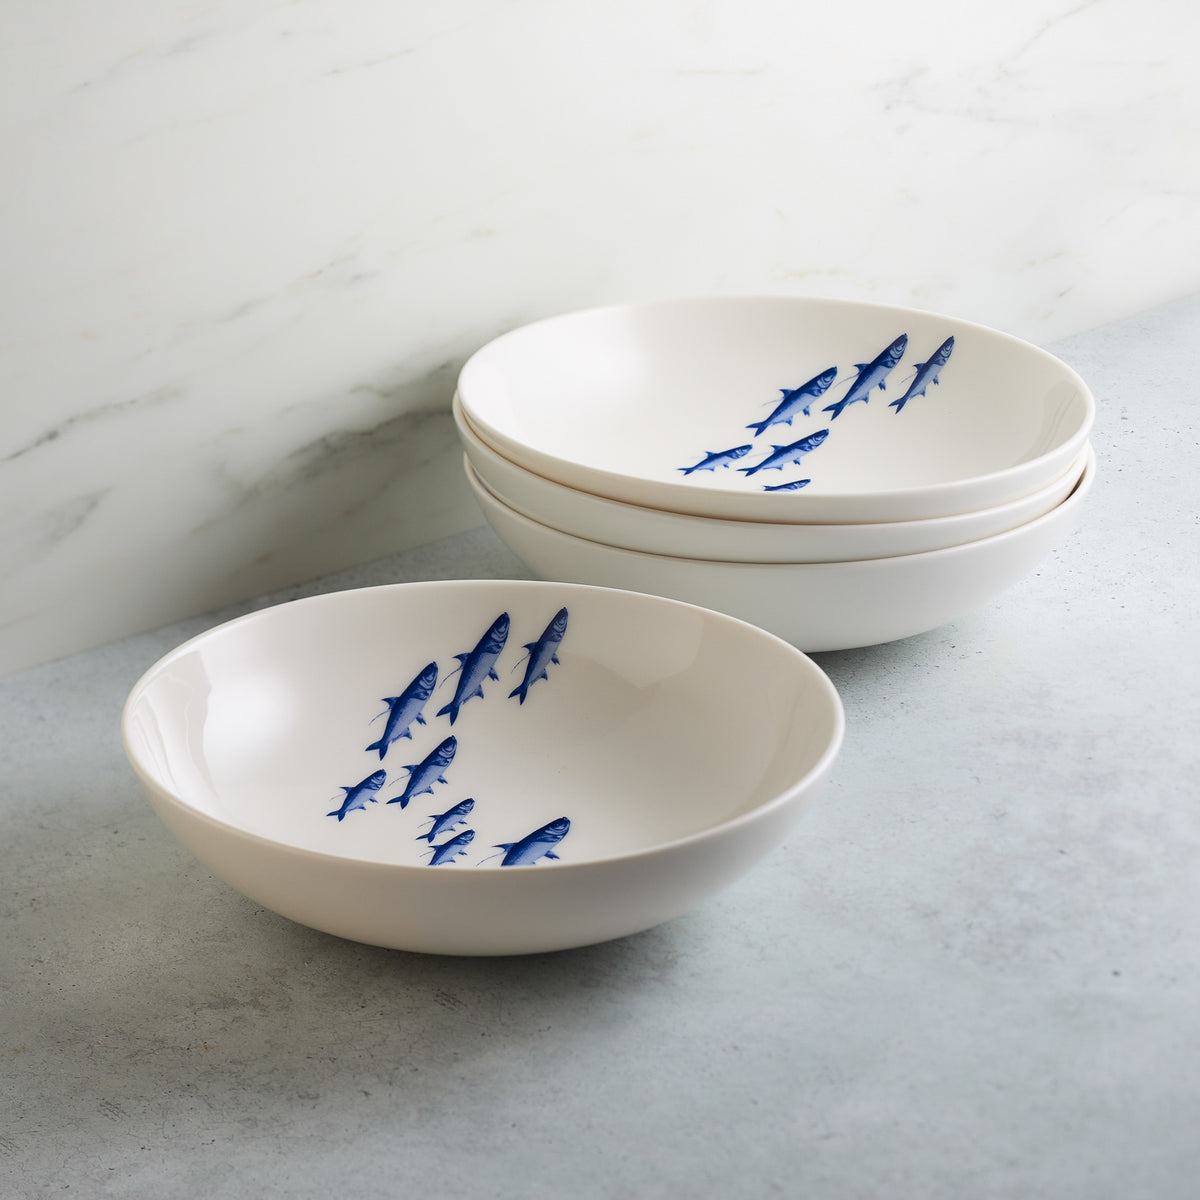 Three white ceramic bowls with blue, school of fish designs are stacked on a gray countertop near a marble wall. Two additional bowls with the same design are in the foreground, all part of the charming Caskata Artisanal Home School Fish Entrée Bowl collection.